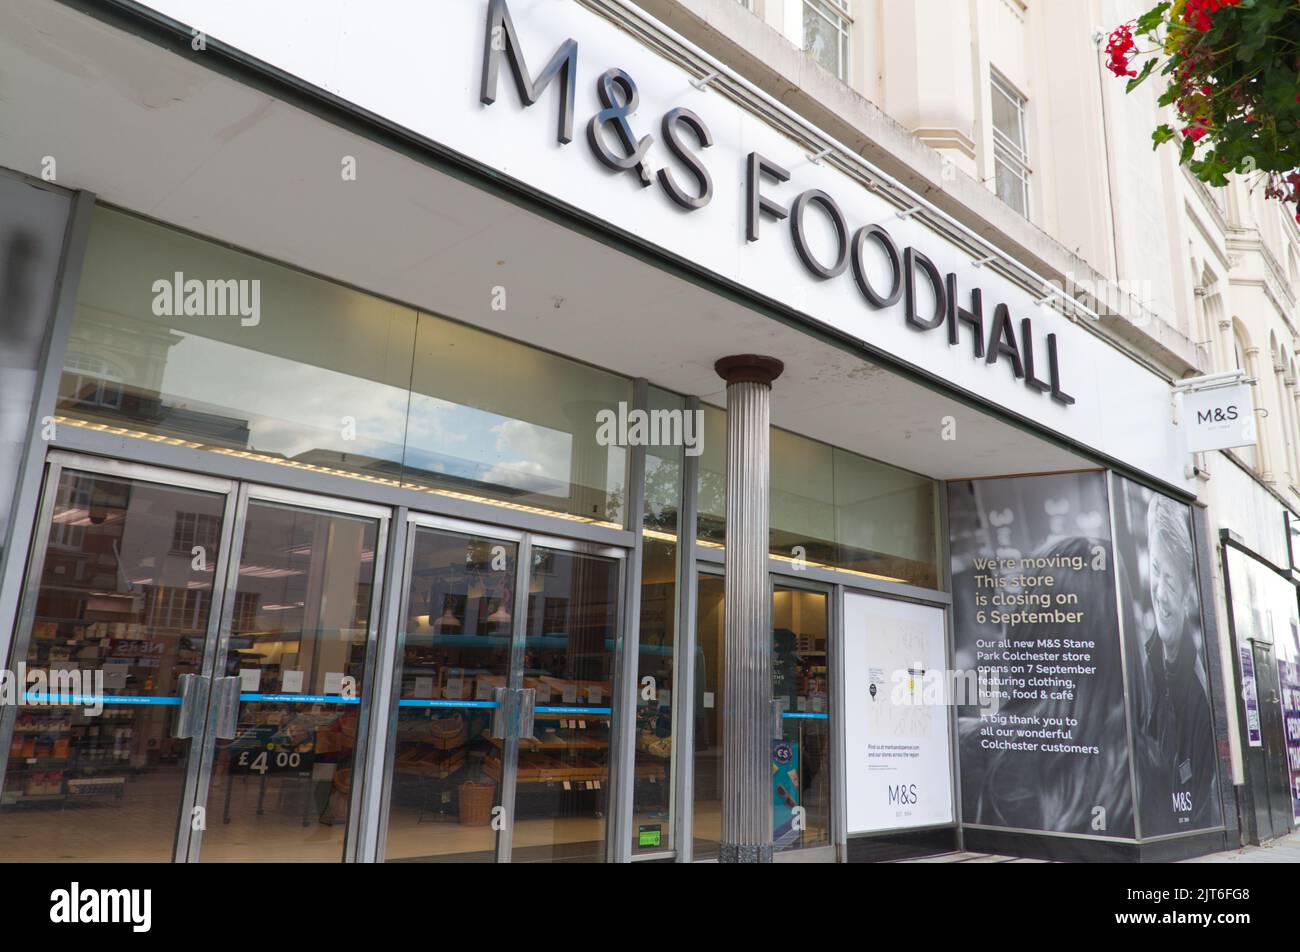 Marks & Spencer exterior of shop in the High Street, Colchester. The store is due to close on 6th September 2022 and relocate to Stane Park Stock Photo